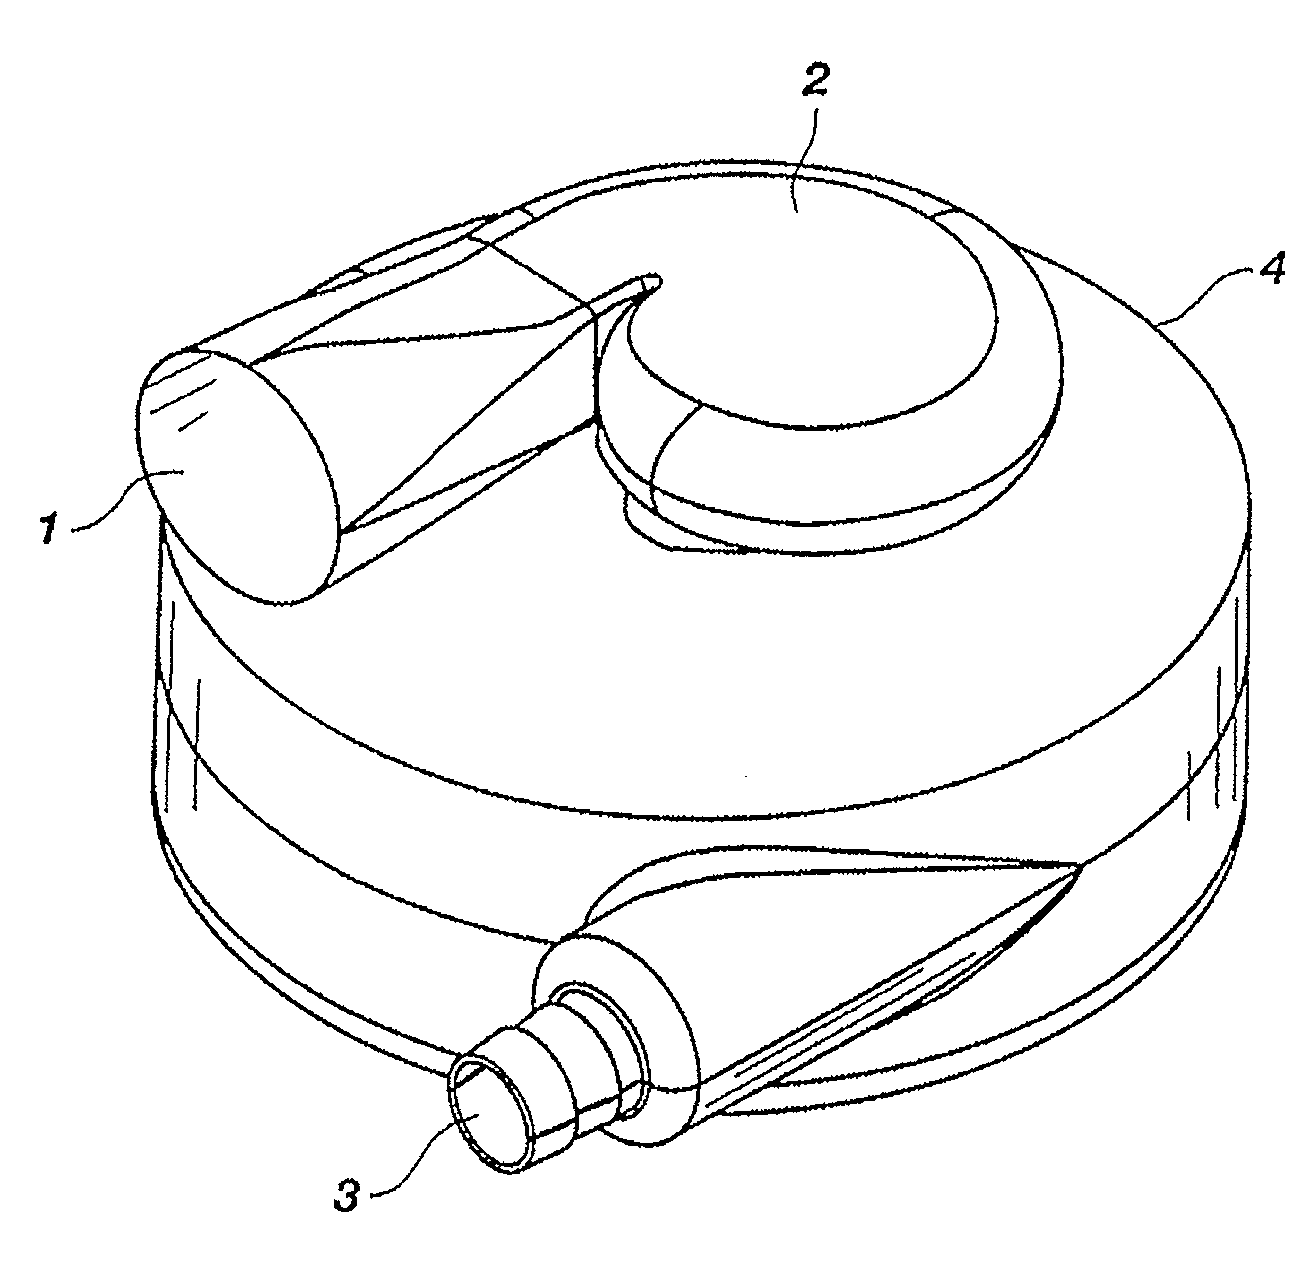 Implantable centrifugal blood pump with hybrid magnetic bearings